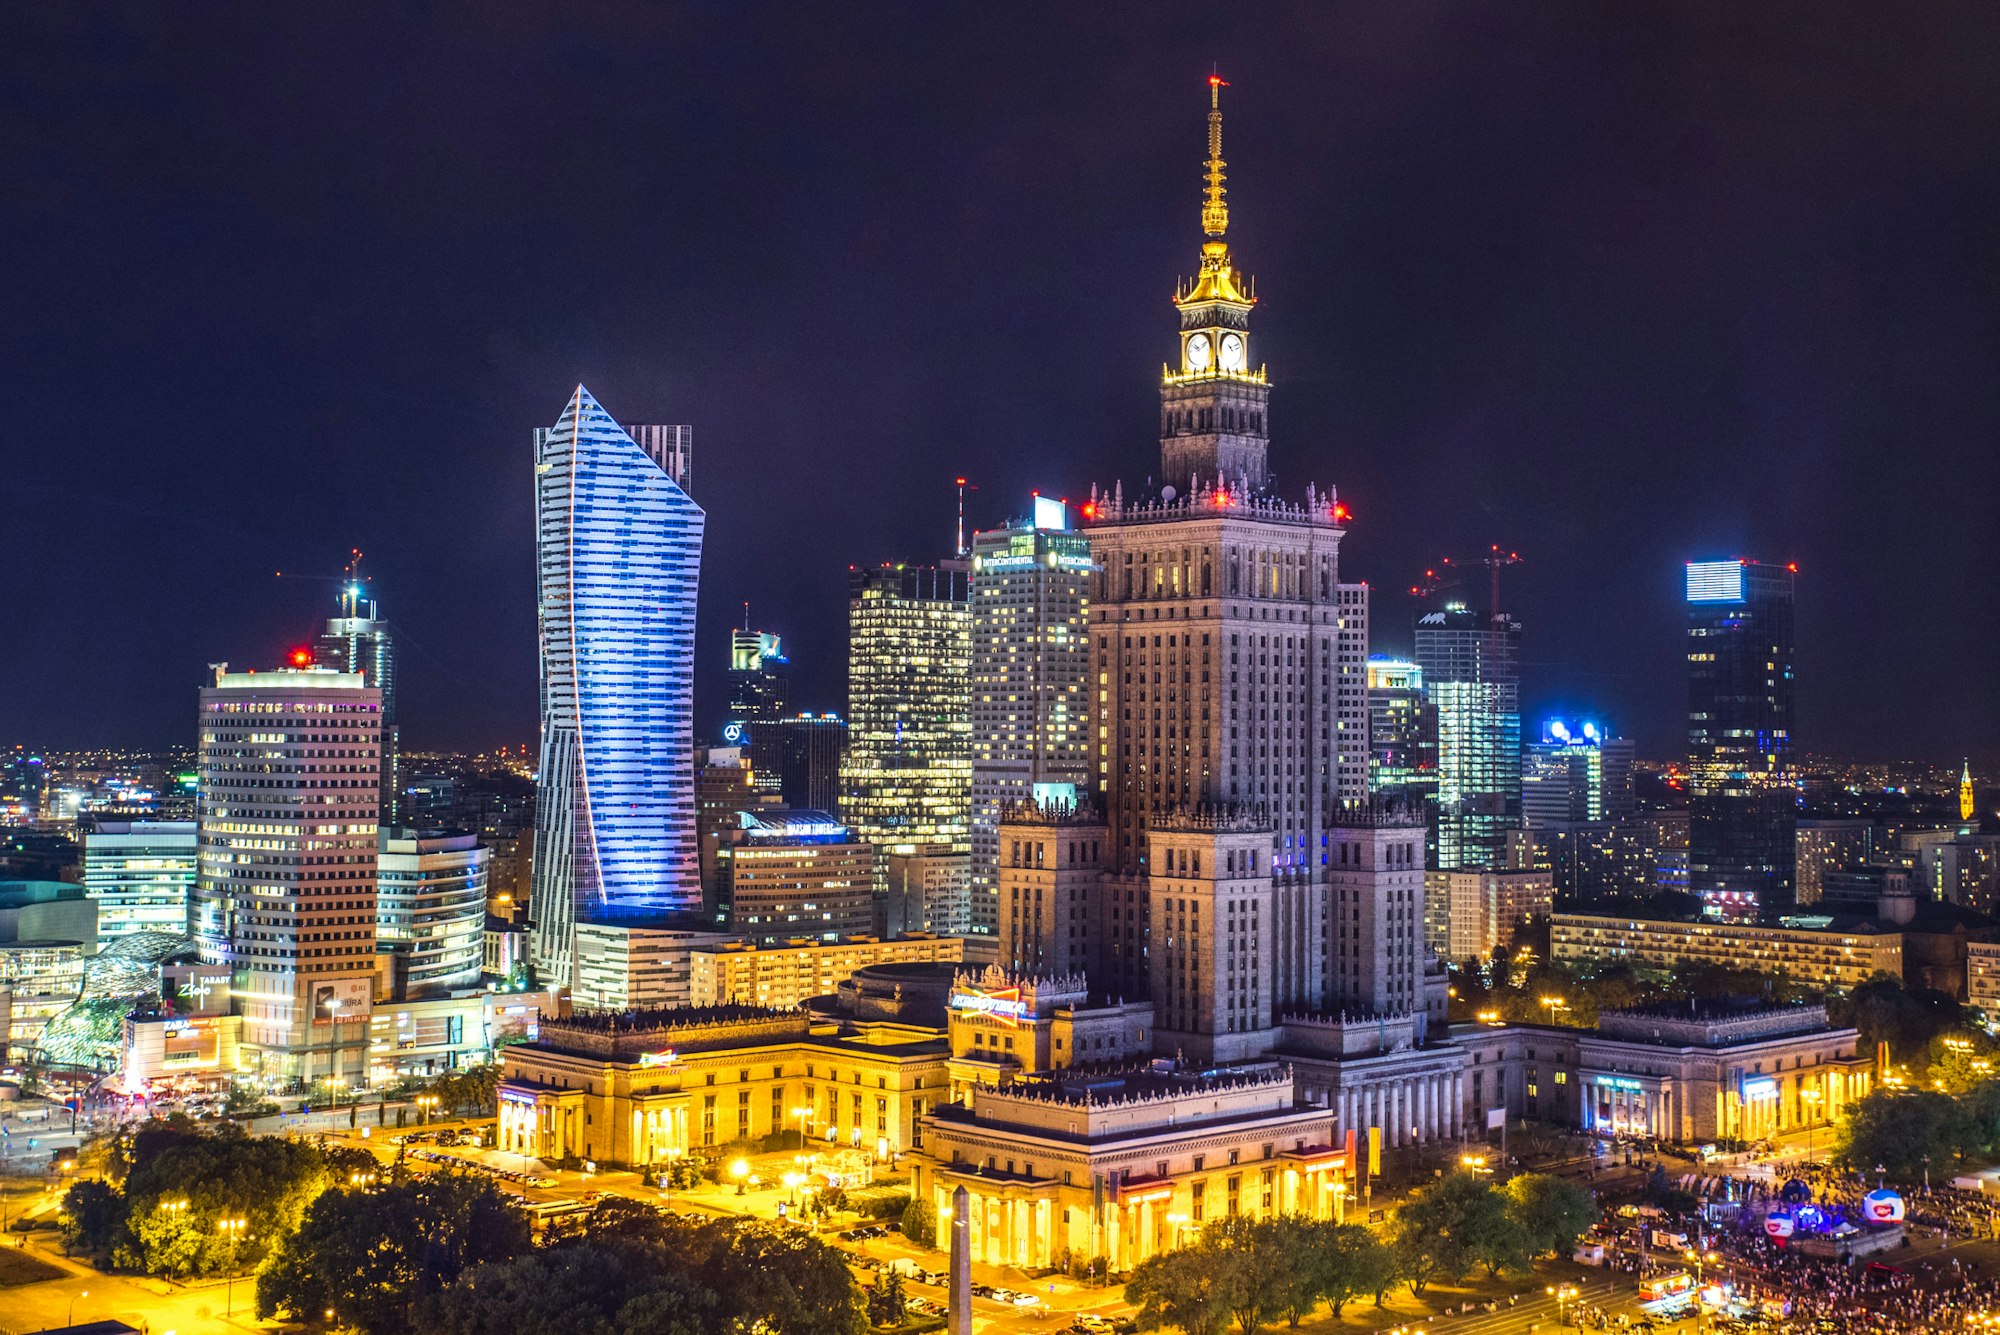 This is Panoramic view of beautifull Warsaw during weekend night.